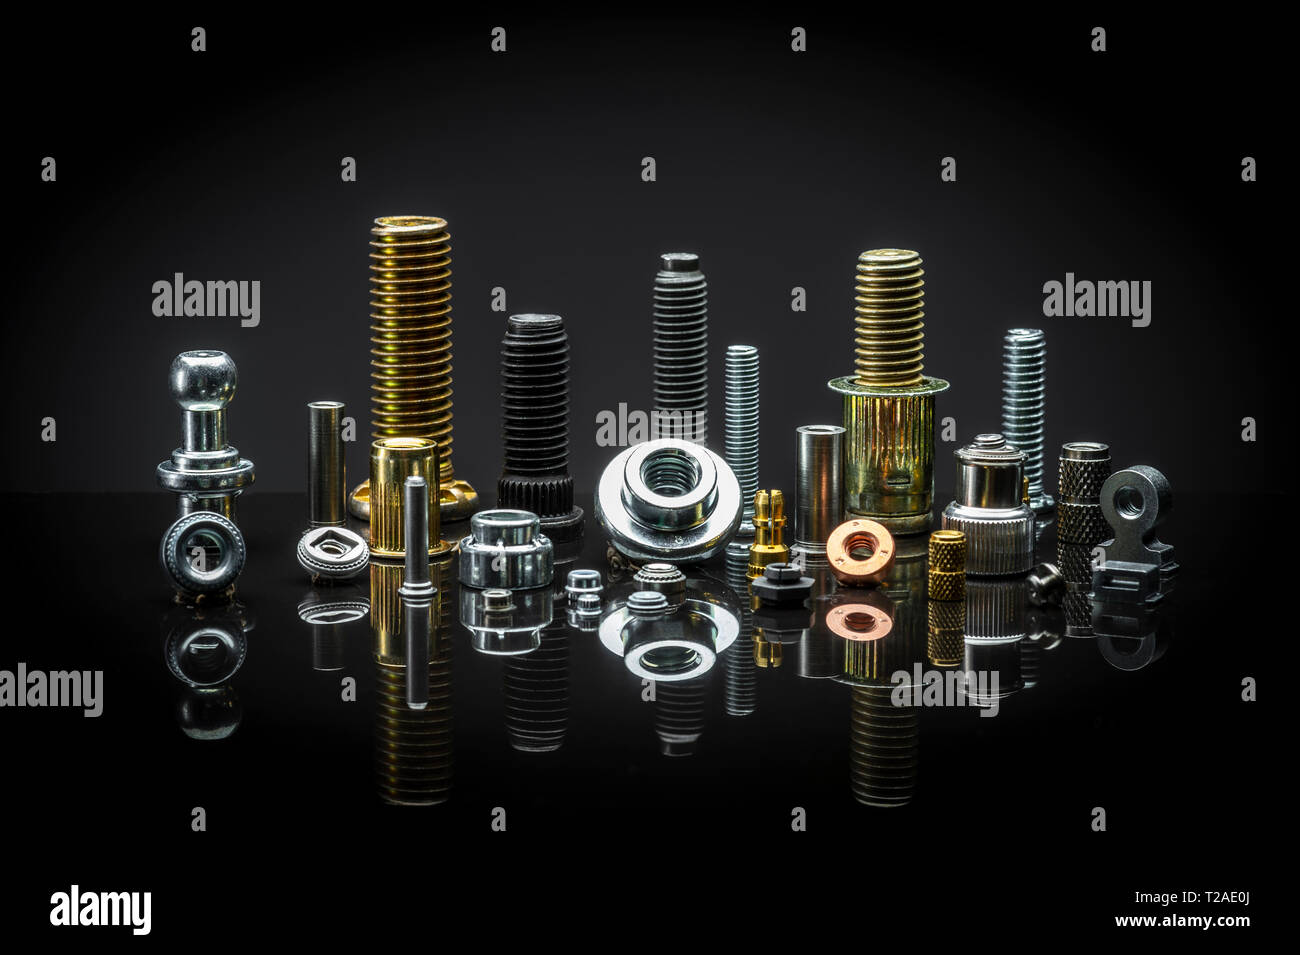 A neat arrangement of assorted Nuts, bolts and fasteners Stock Photo